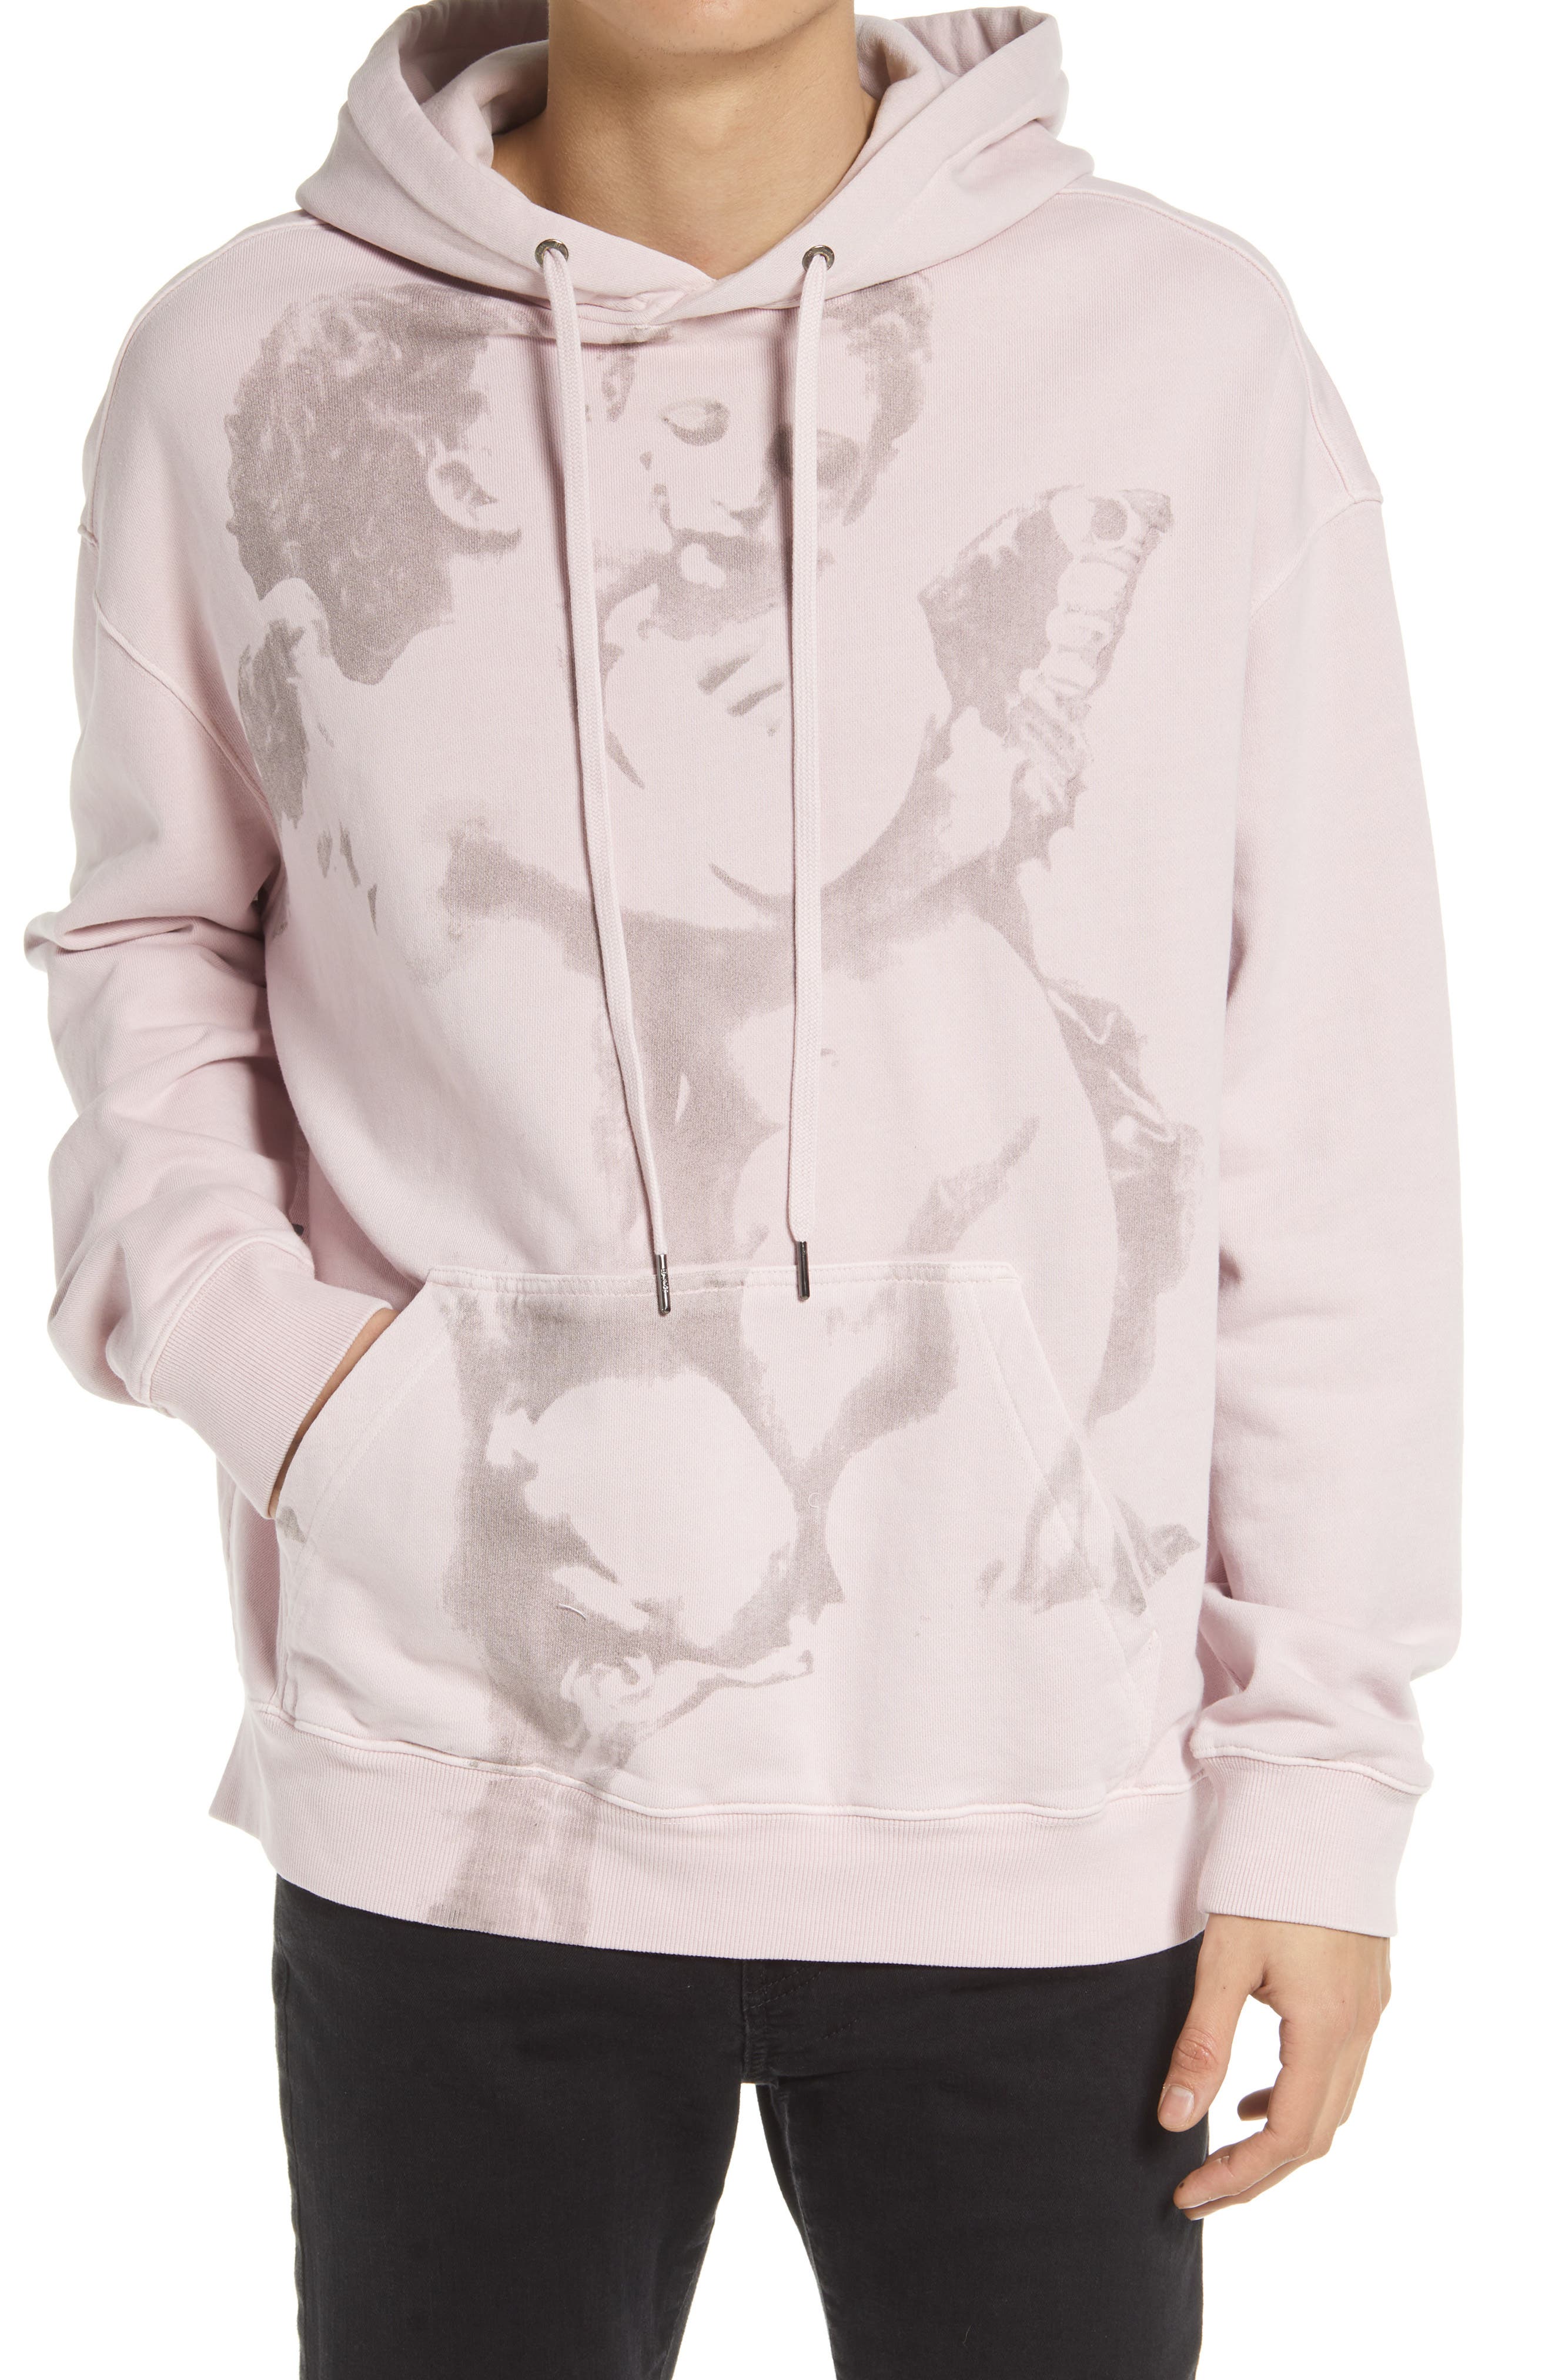 Ksubi Men's High Lovers Kash Cotton Graphic Hoodie in Pink at Nordstrom, Size X-Large